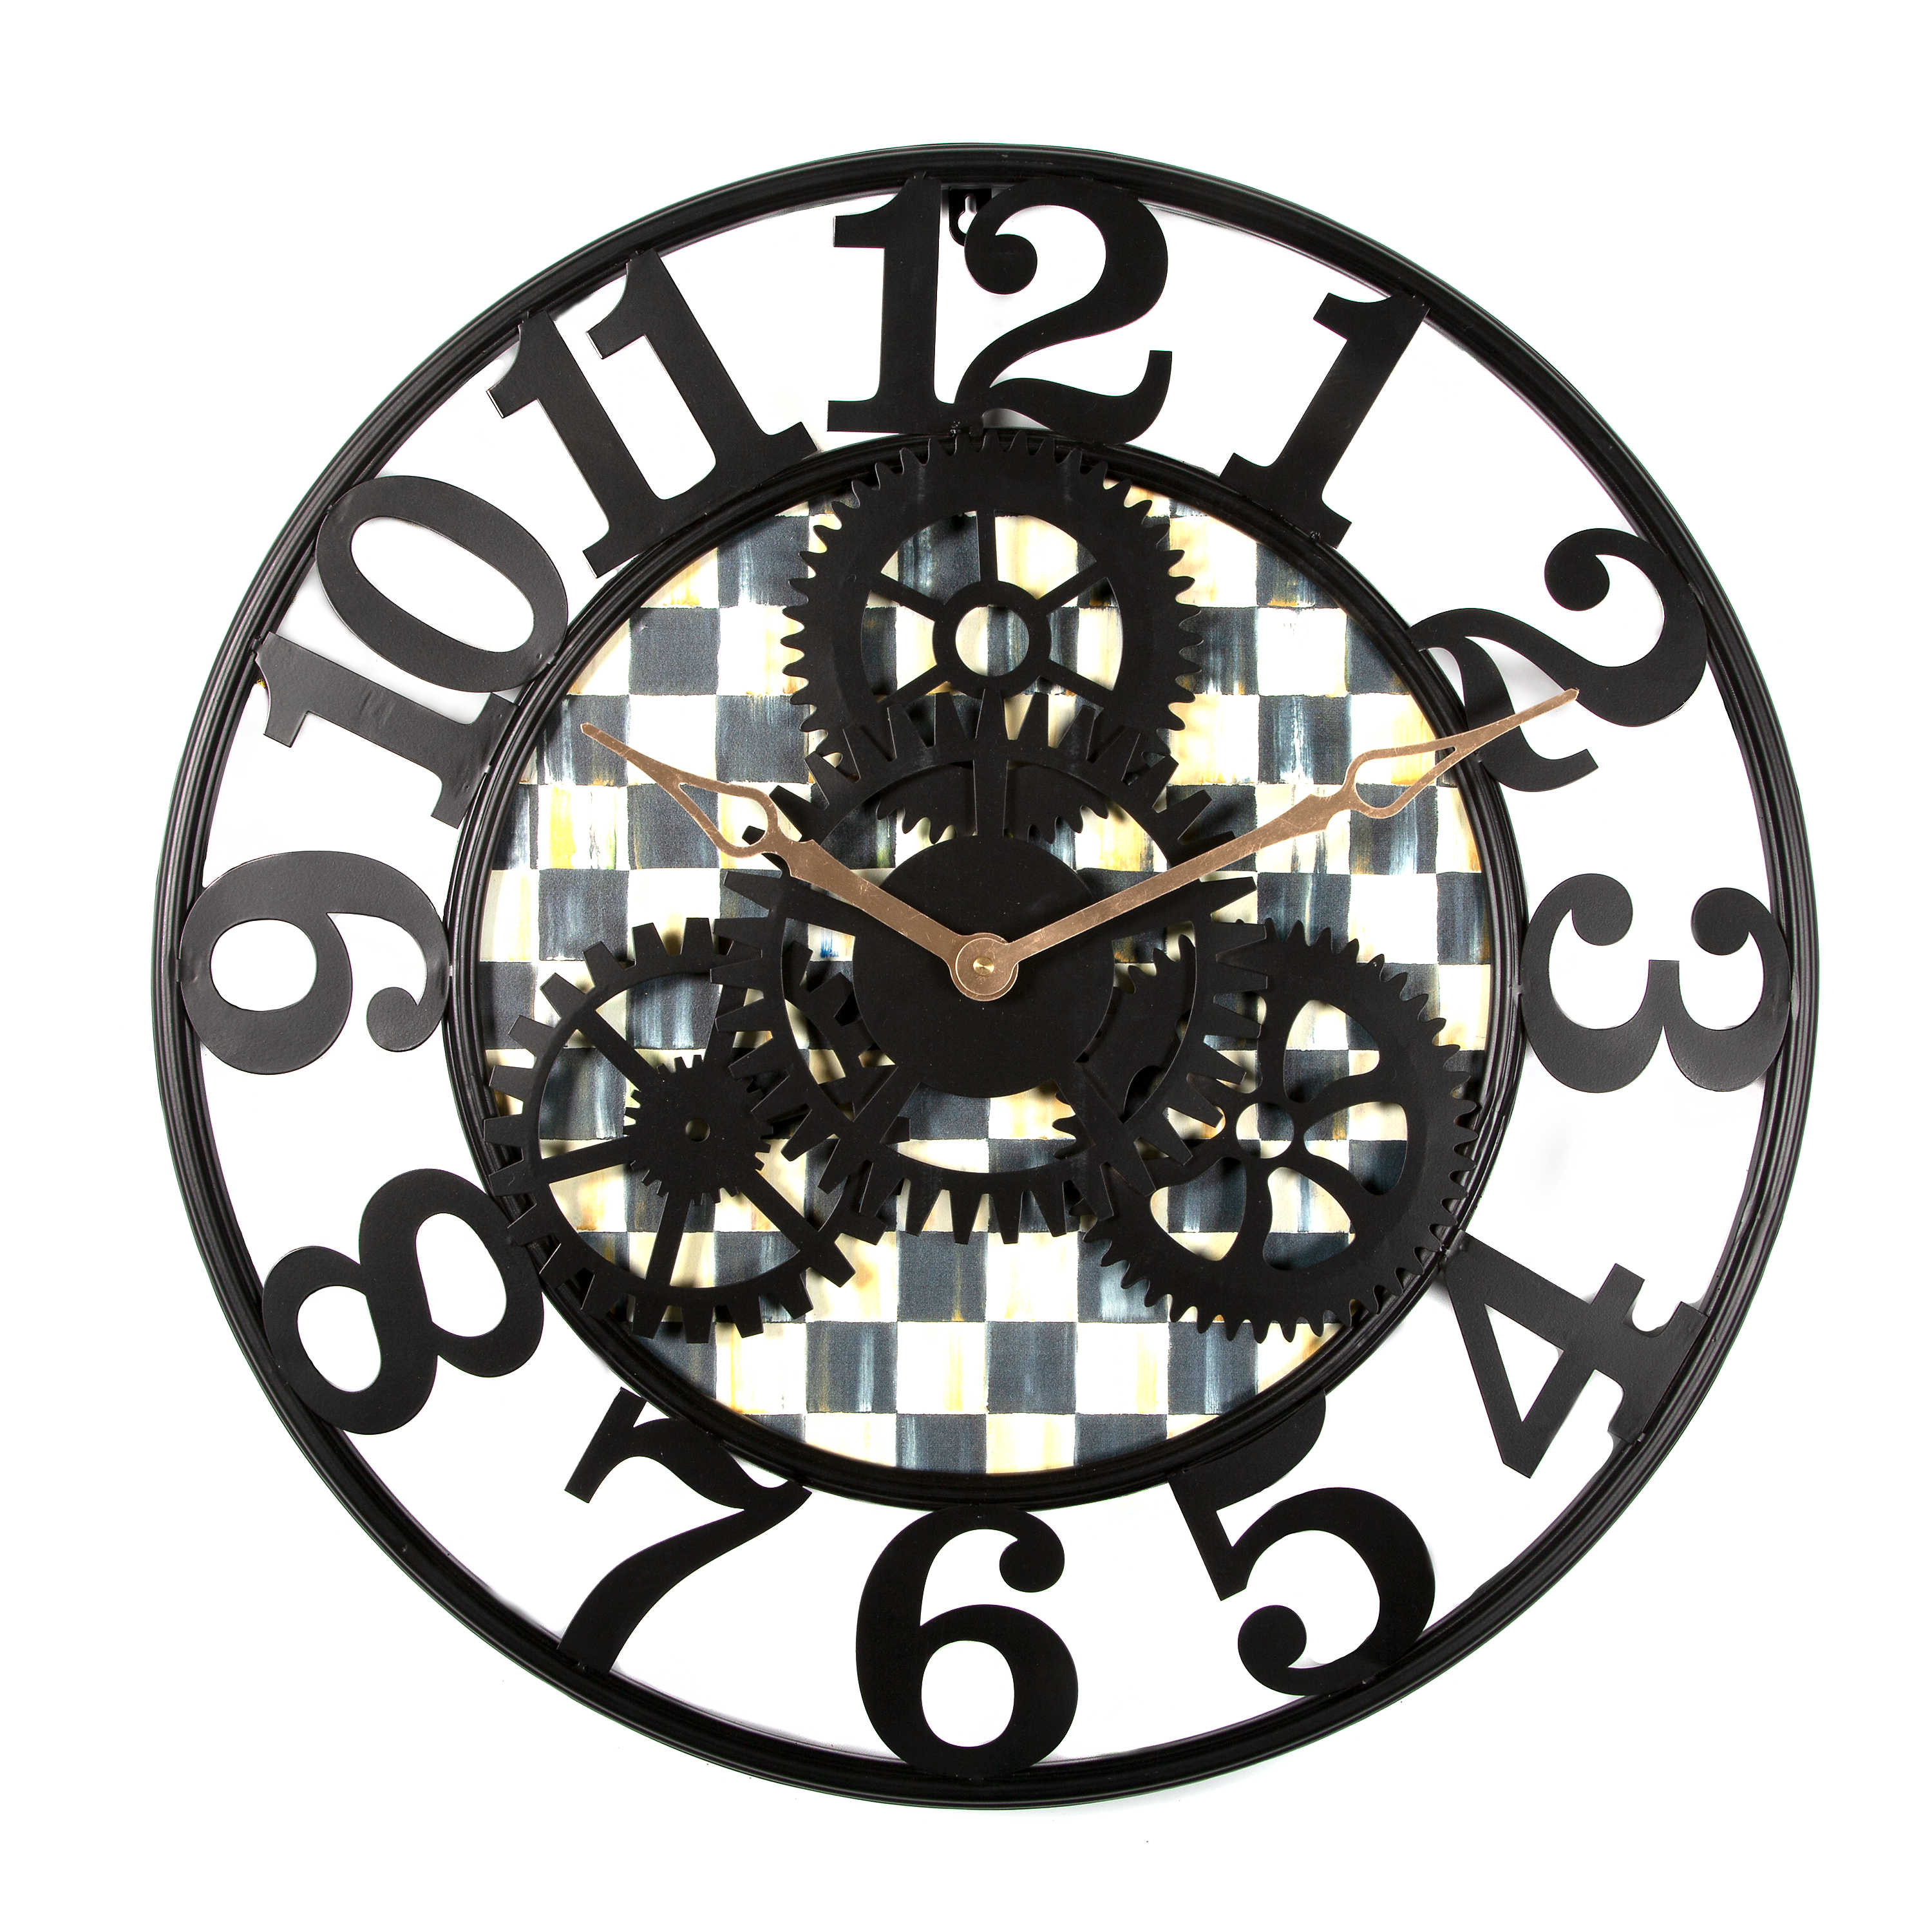 Courtly Check Farmhouse Wall Clock - Small mackenzie-childs Panama 0